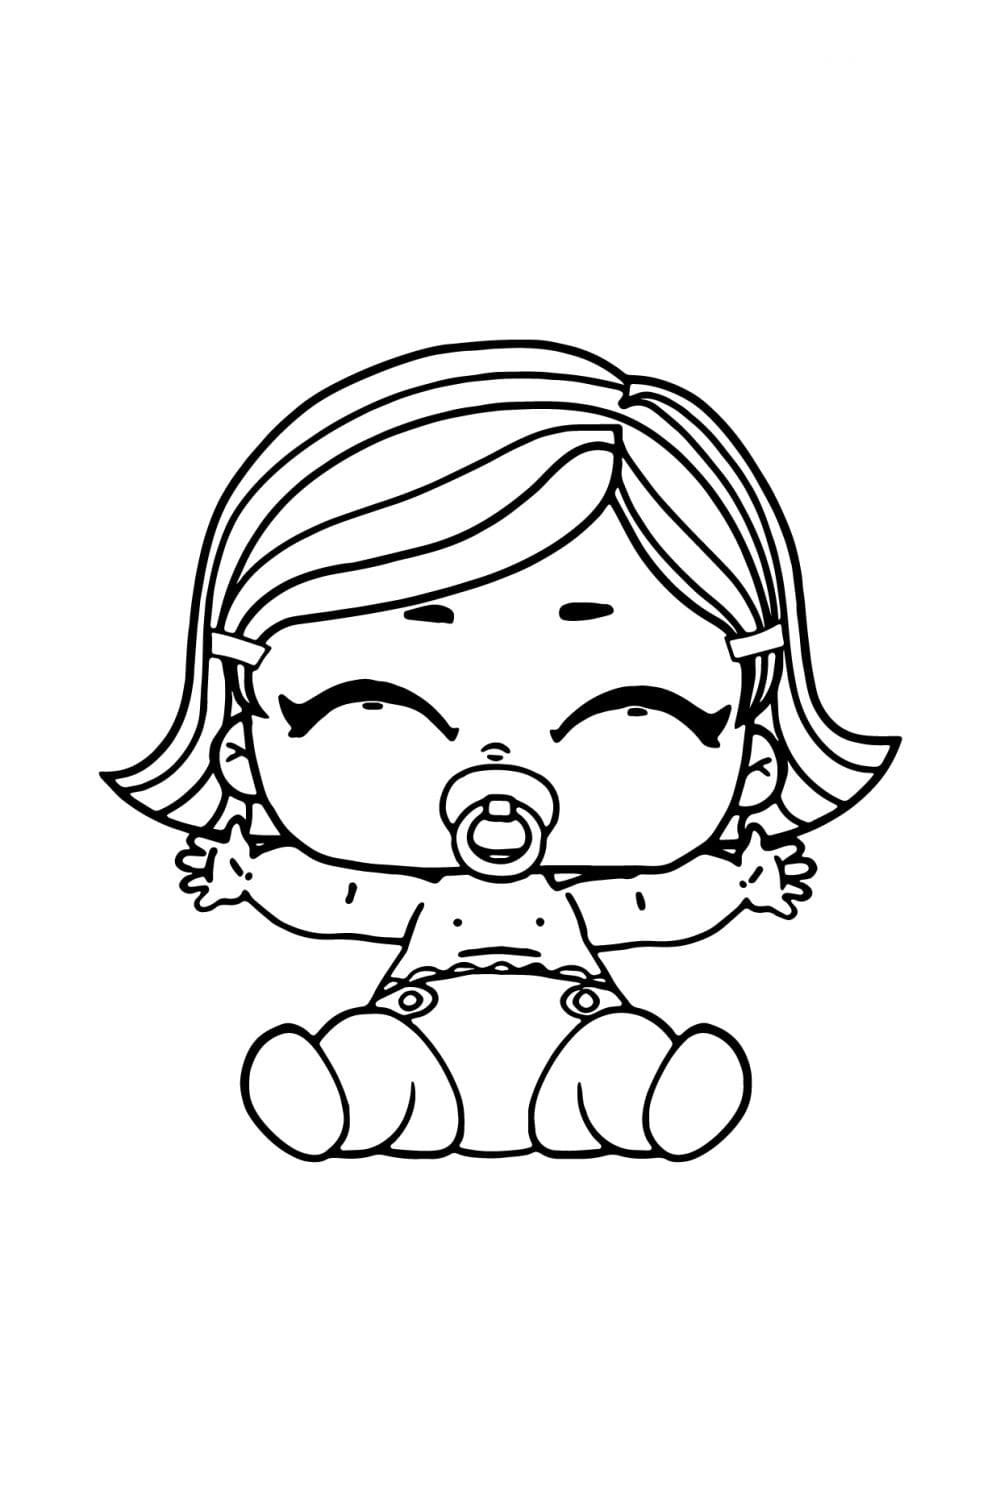 LOL Baby Lil Dreamy Doll Coloring Page   Free Printable Coloring ...